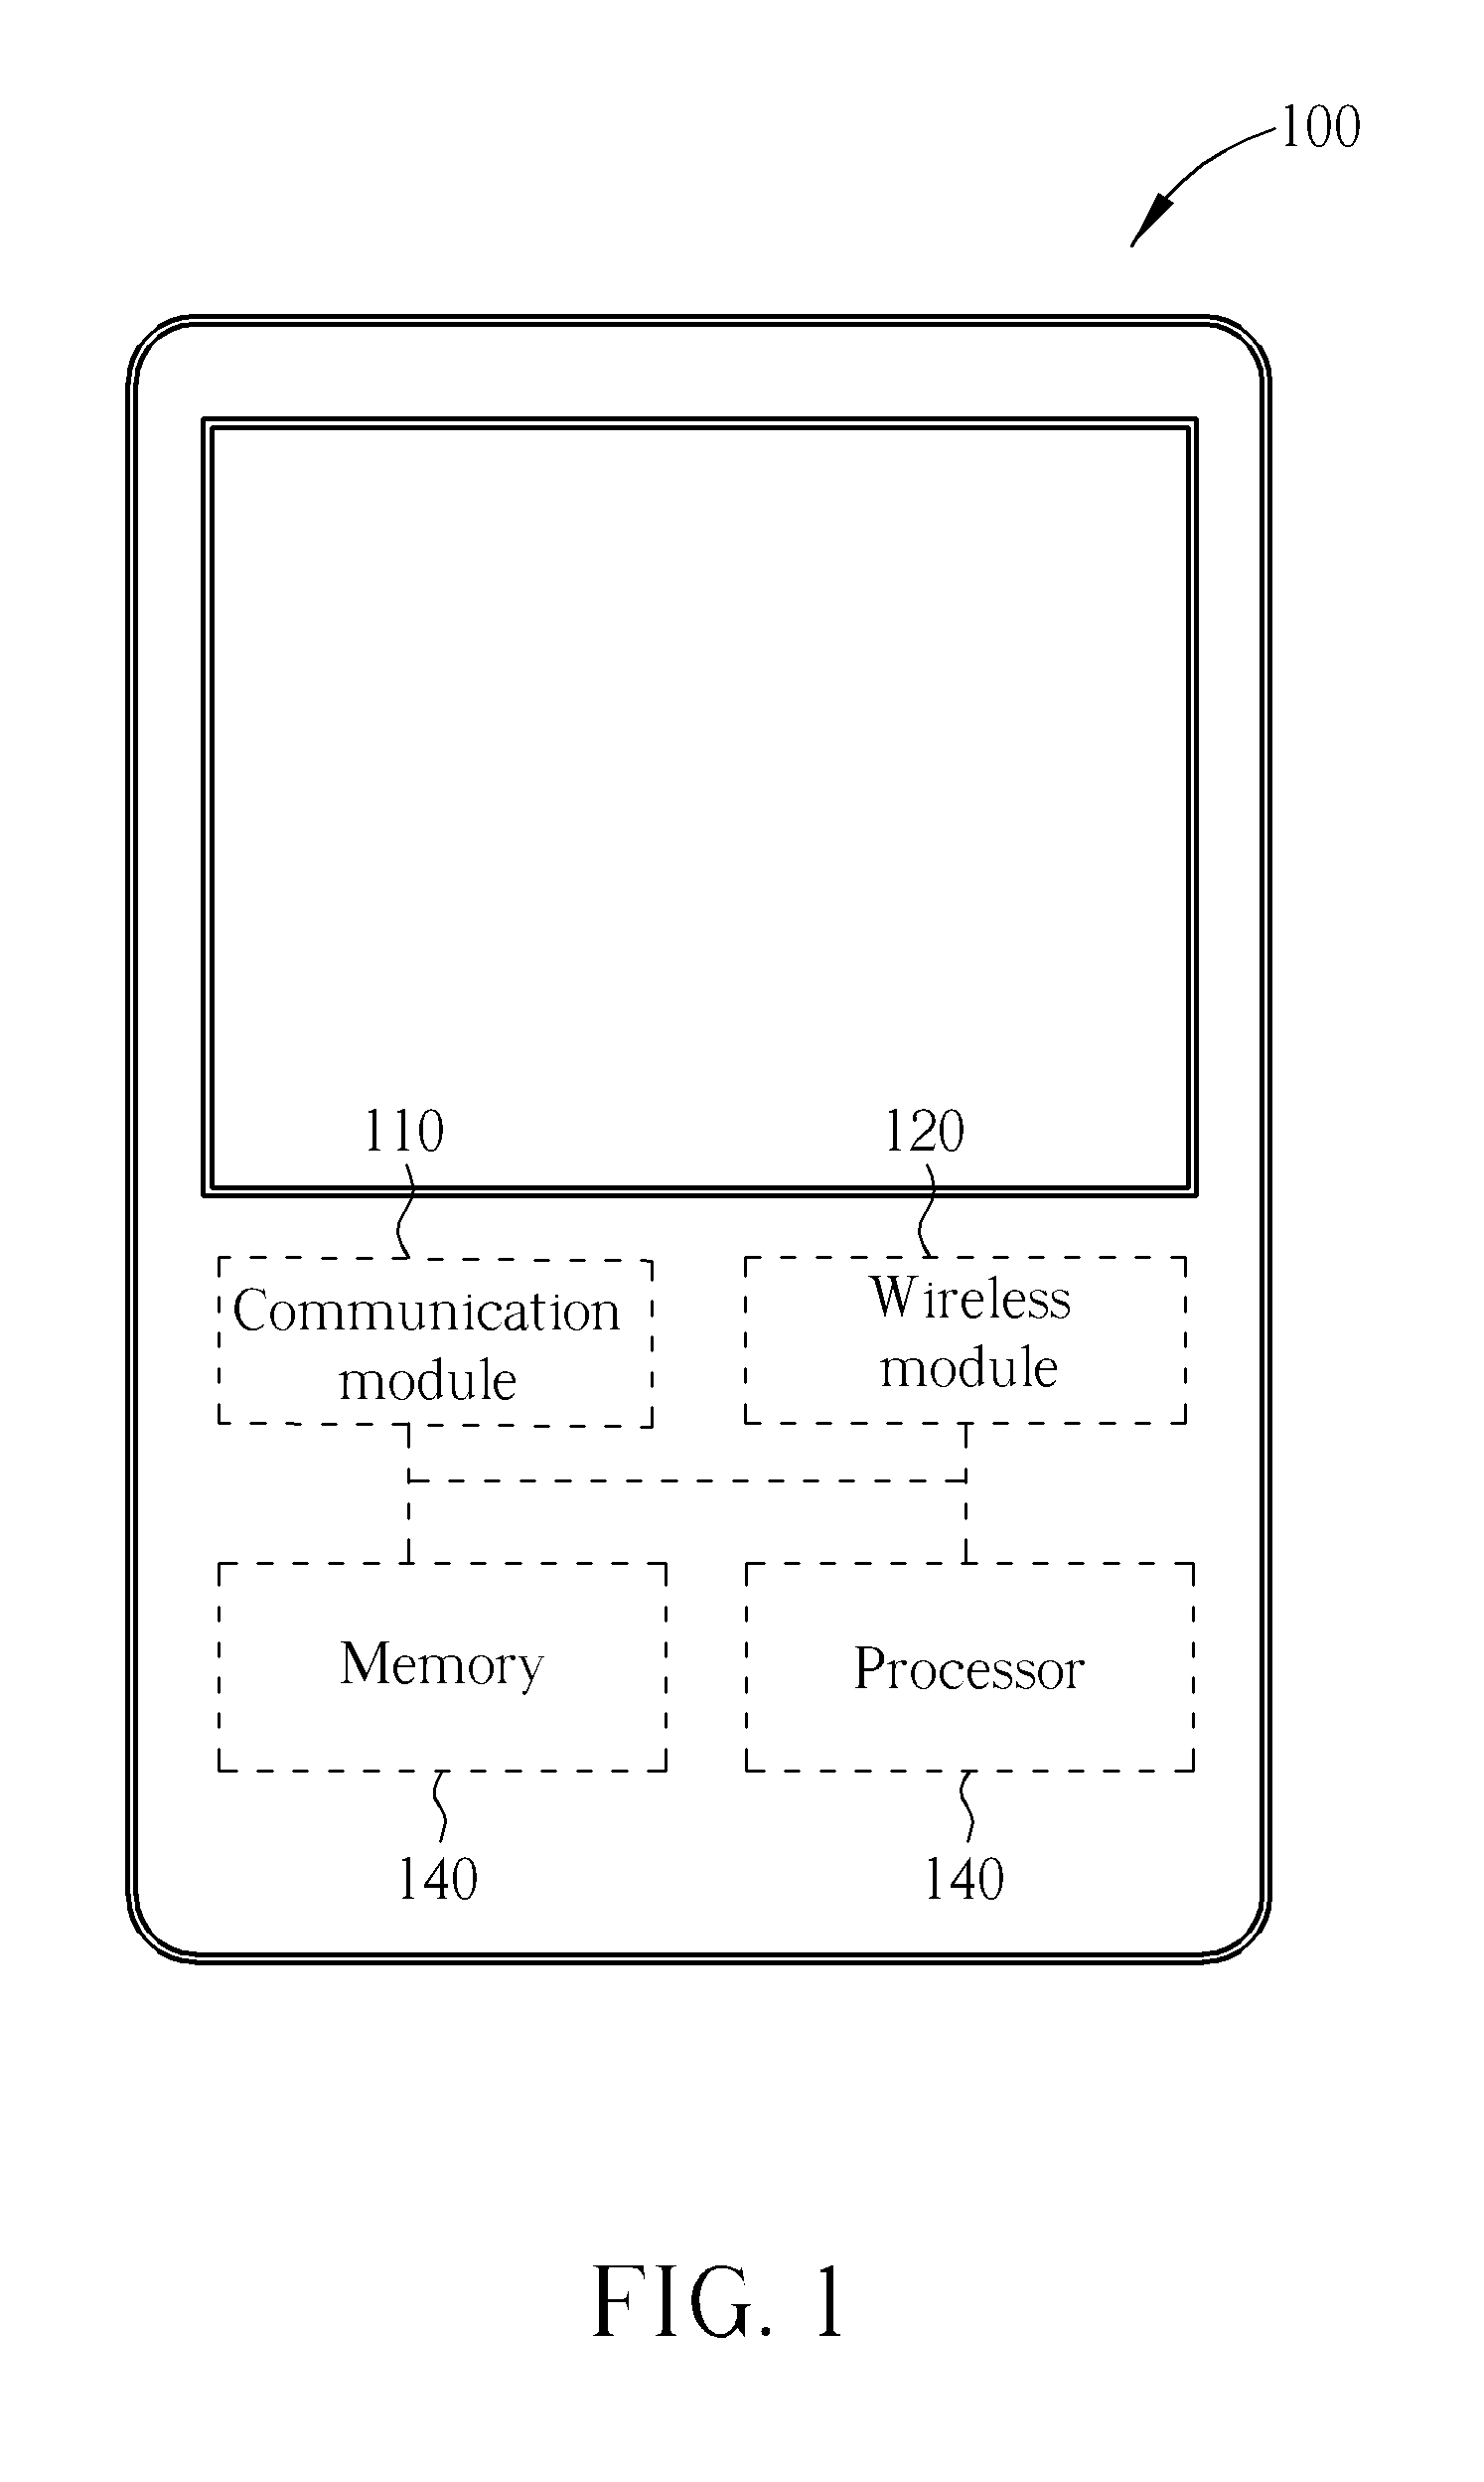 Method for switching video calls between devices